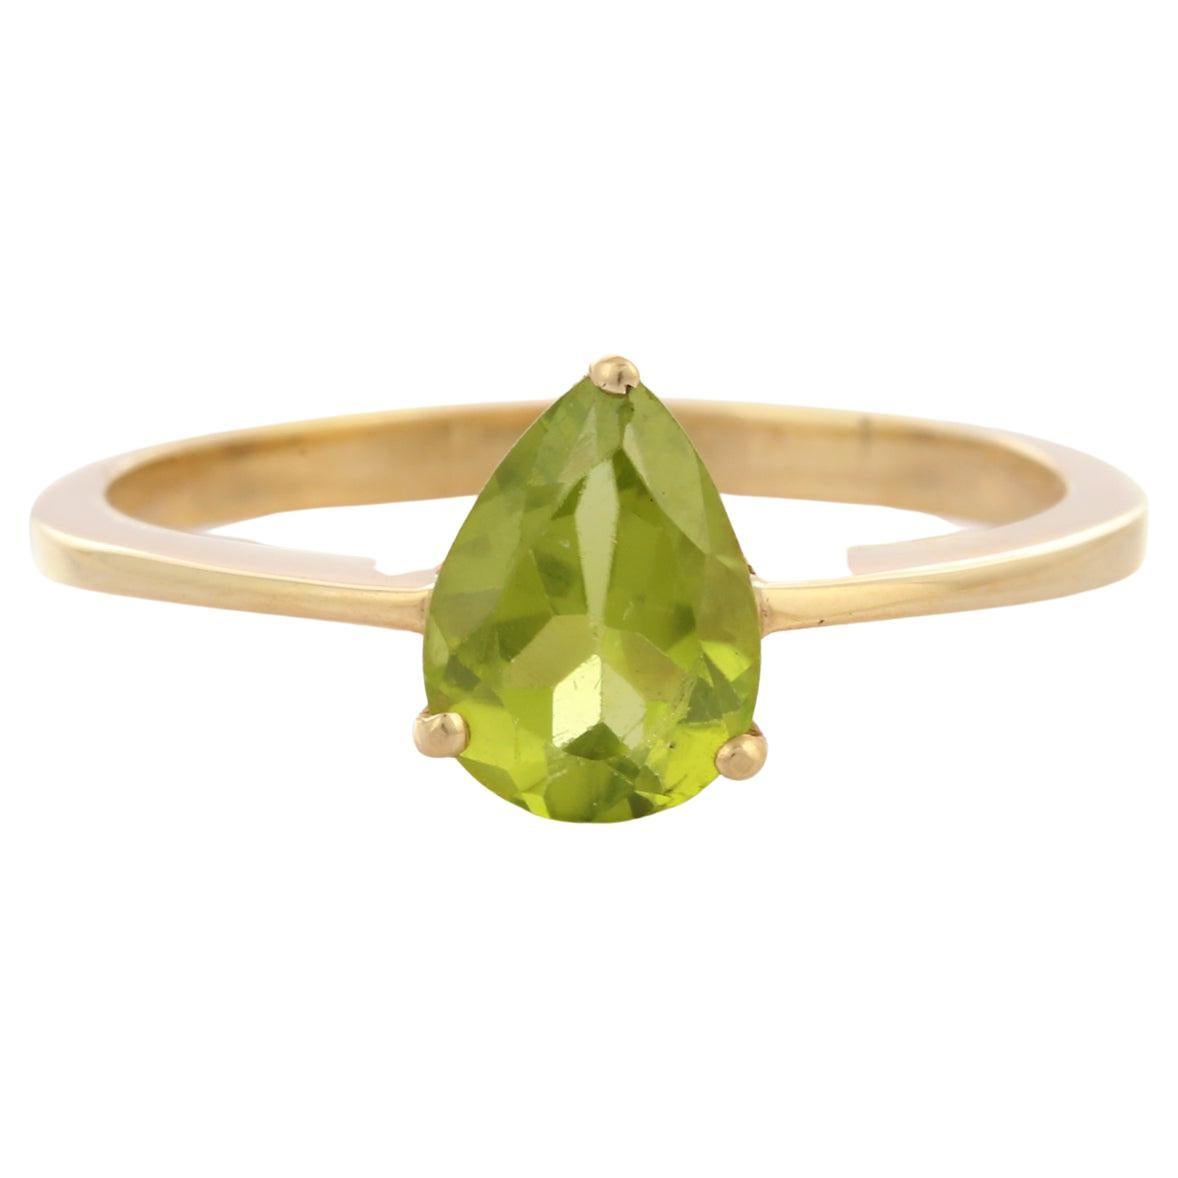 Pear Cut Peridot Solitaire Ring in 14K Yellow Gold